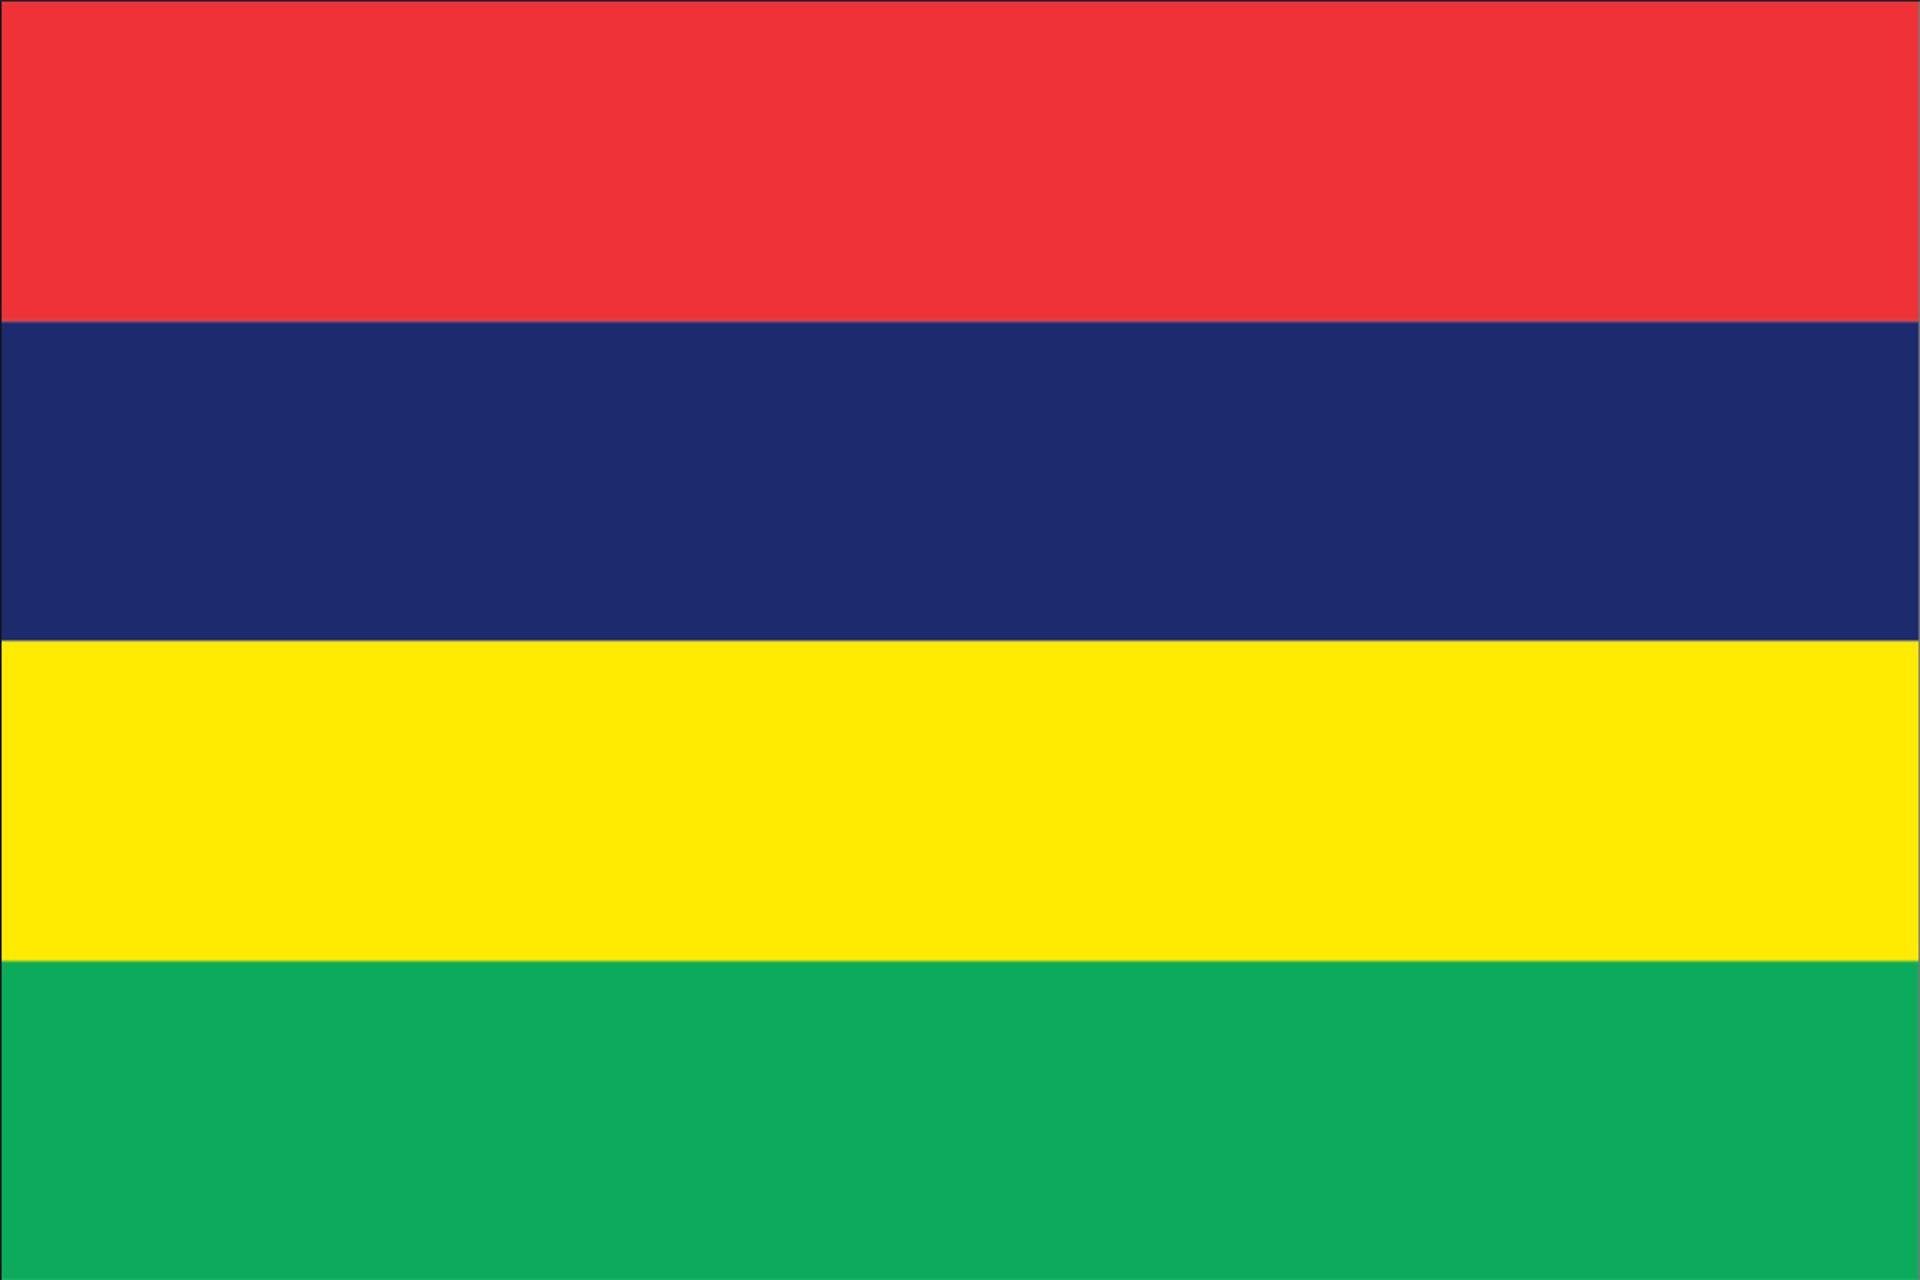 160 Mauritius Flagge flaggenmeer Querformat g/m²